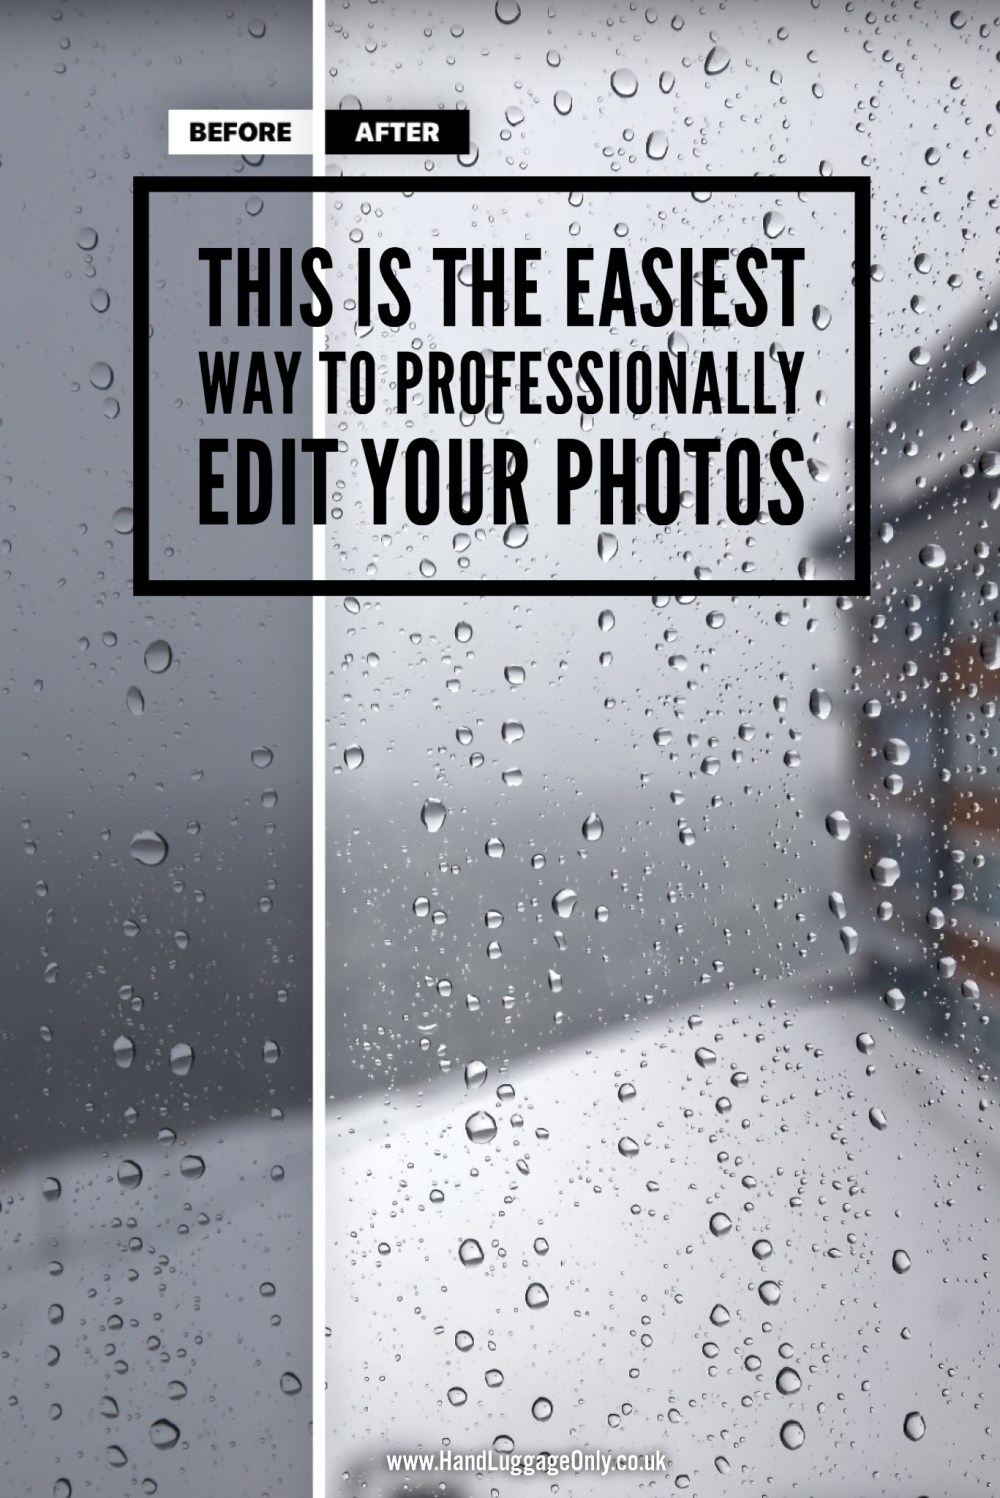 This Is The Easiest Way To Professionally Edit Your Photos